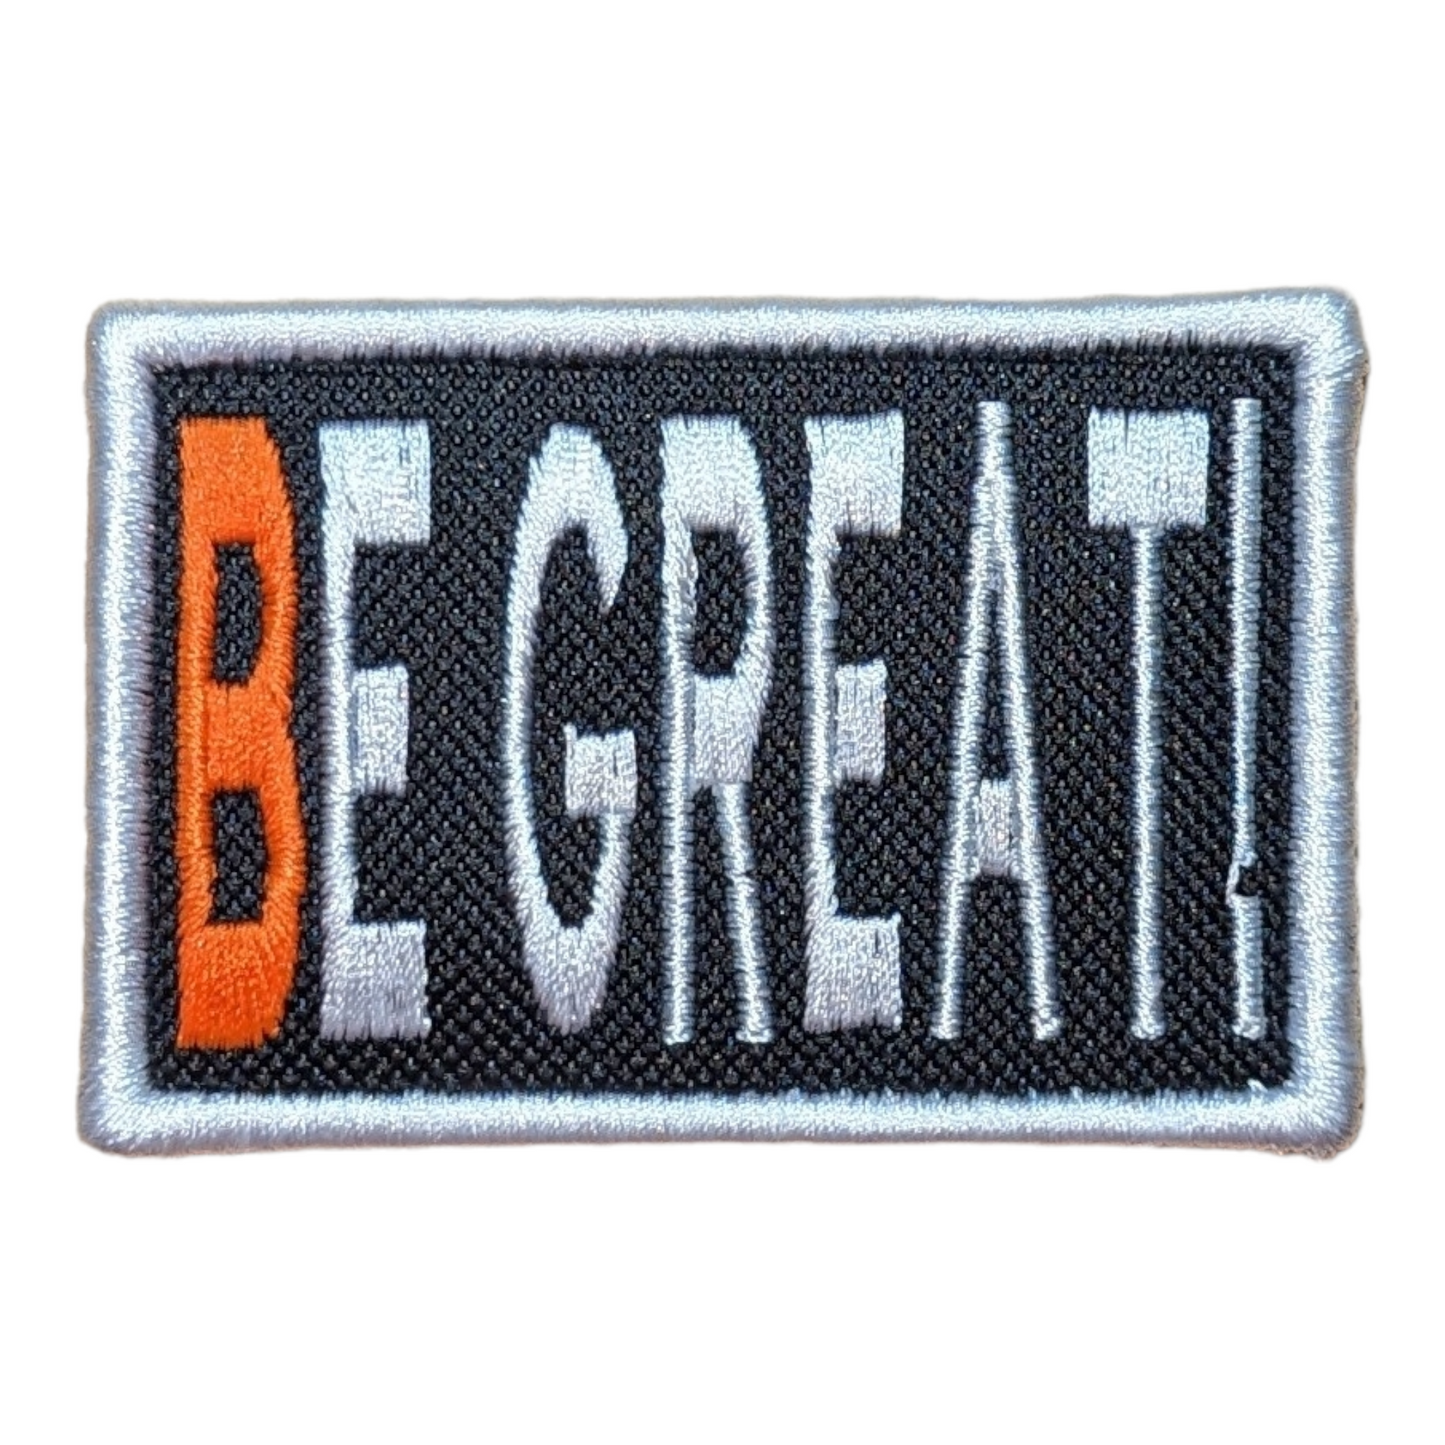 DINGBAT Cover  & BE GREAT! Patch